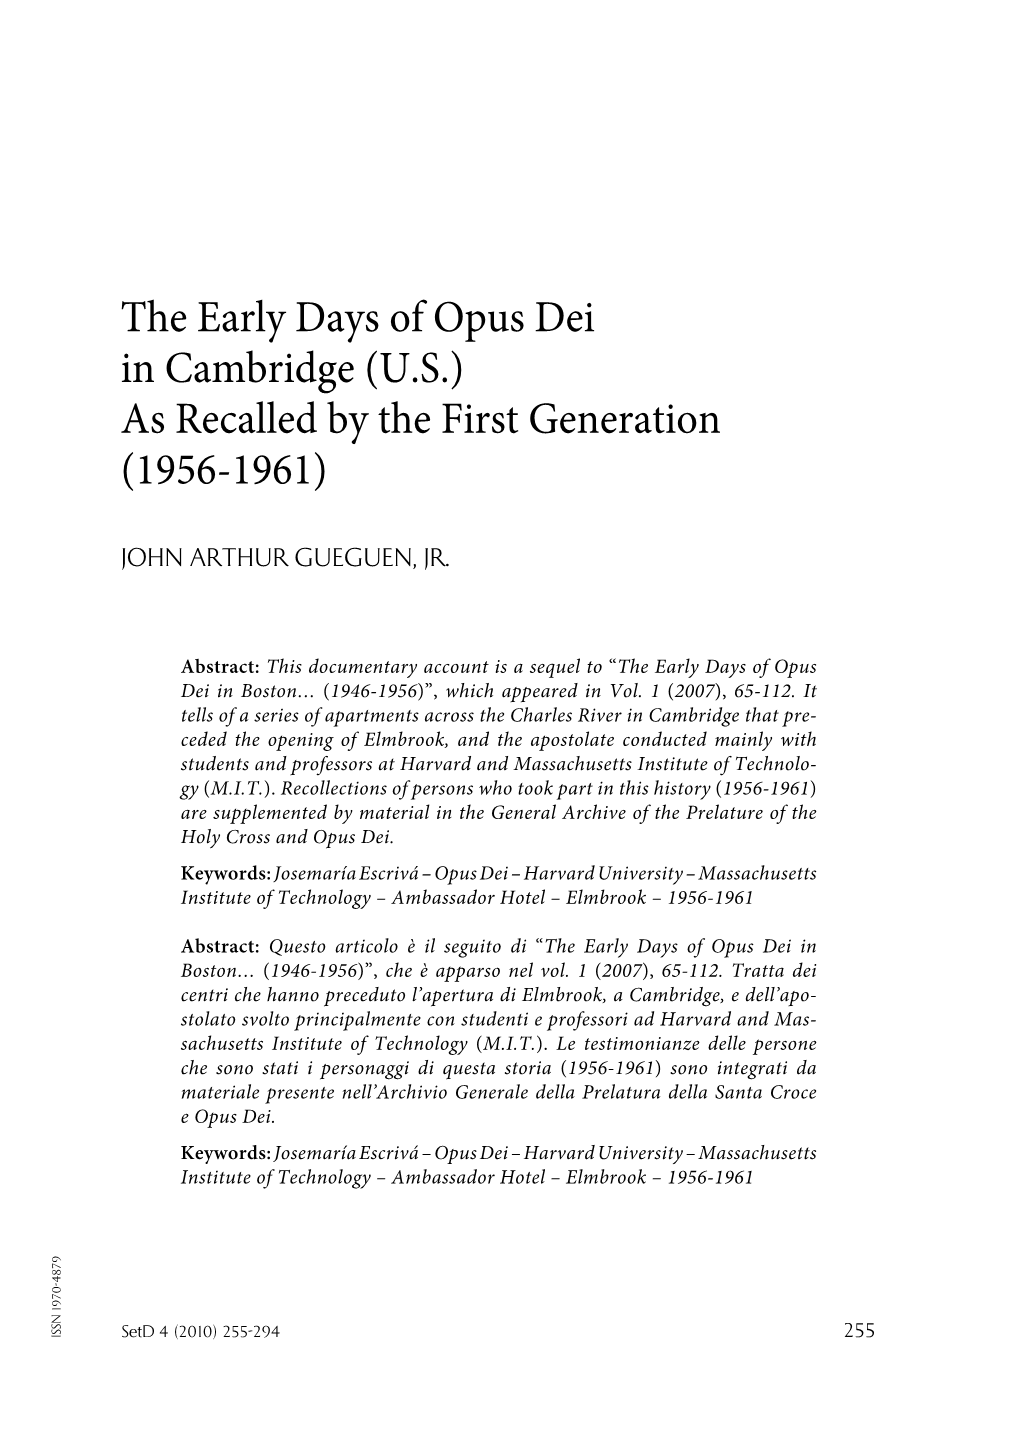 The Early Days of Opus Dei in Cambridge (U.S.) As Recalled by the First Generation (1956-1961)